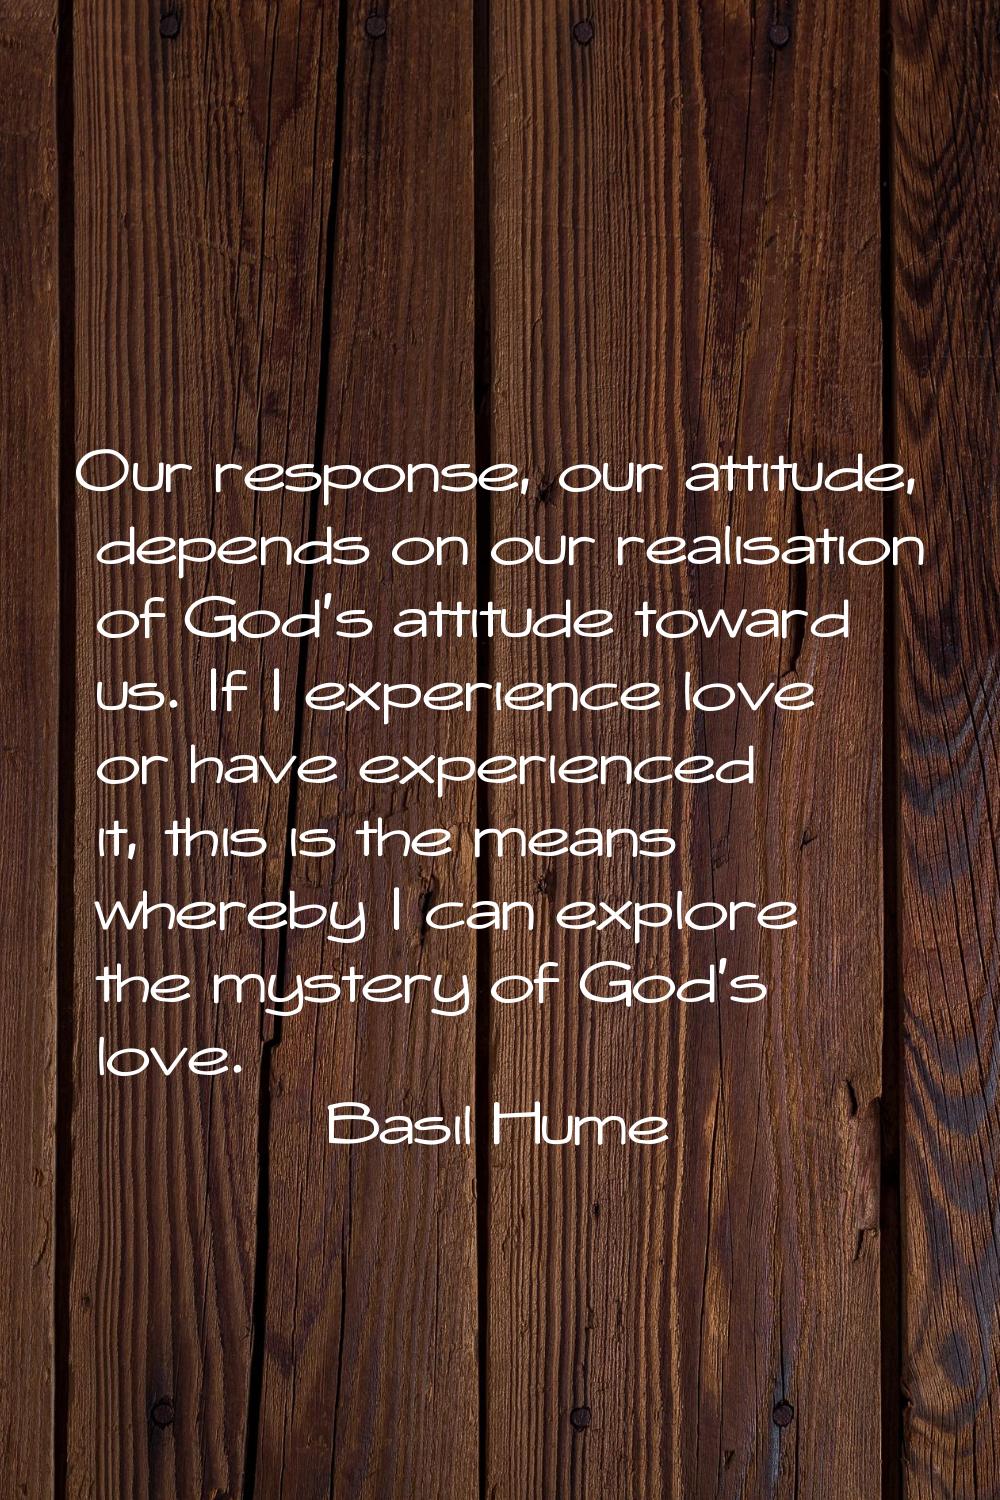 Our response, our attitude, depends on our realisation of God's attitude toward us. If I experience